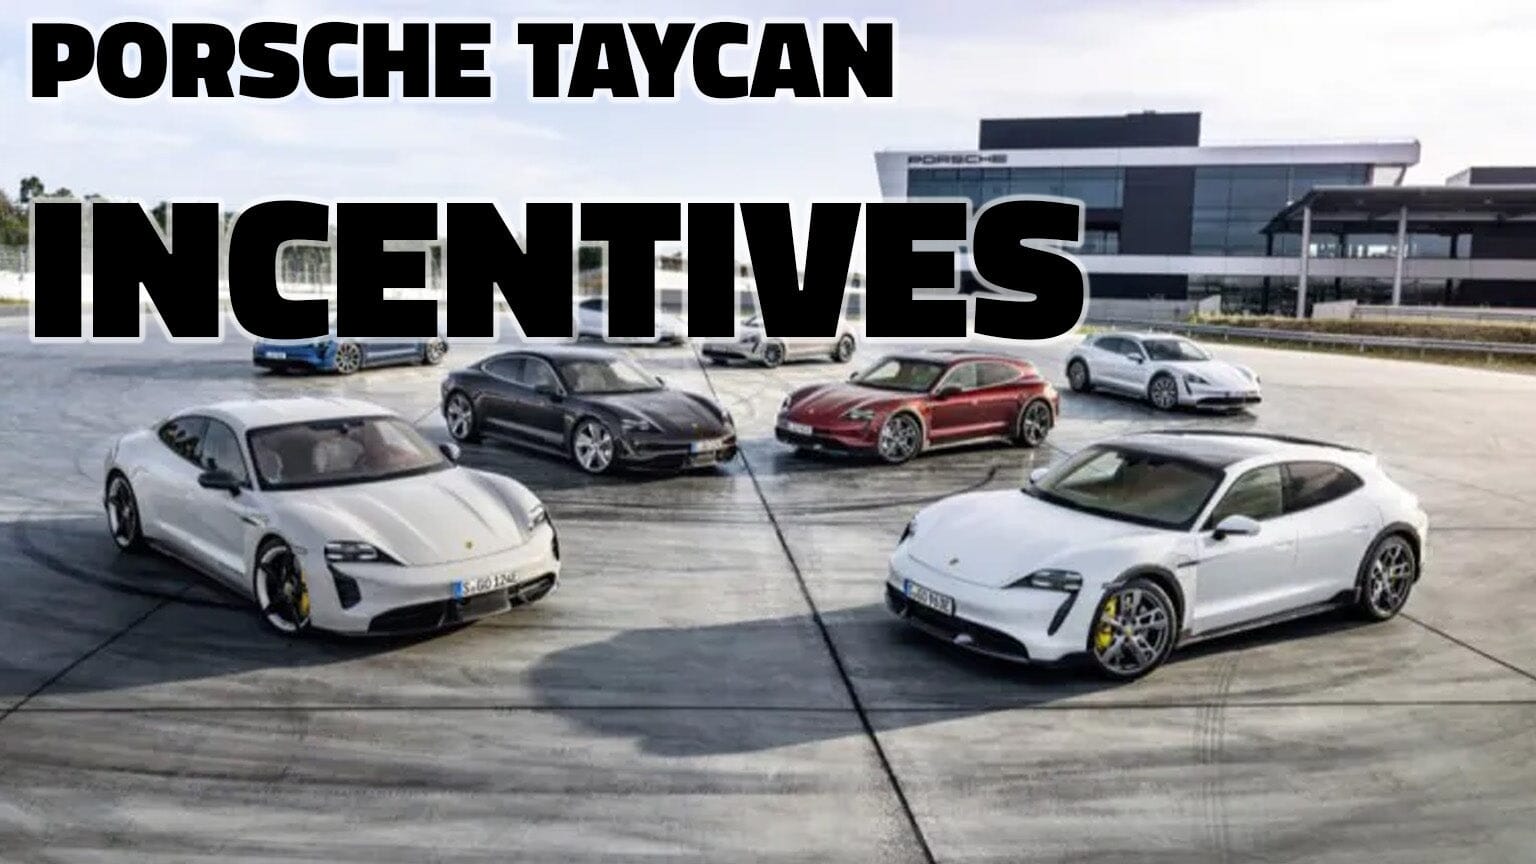 Porsche Taycan Incentives 2023: Everything You Need to Know